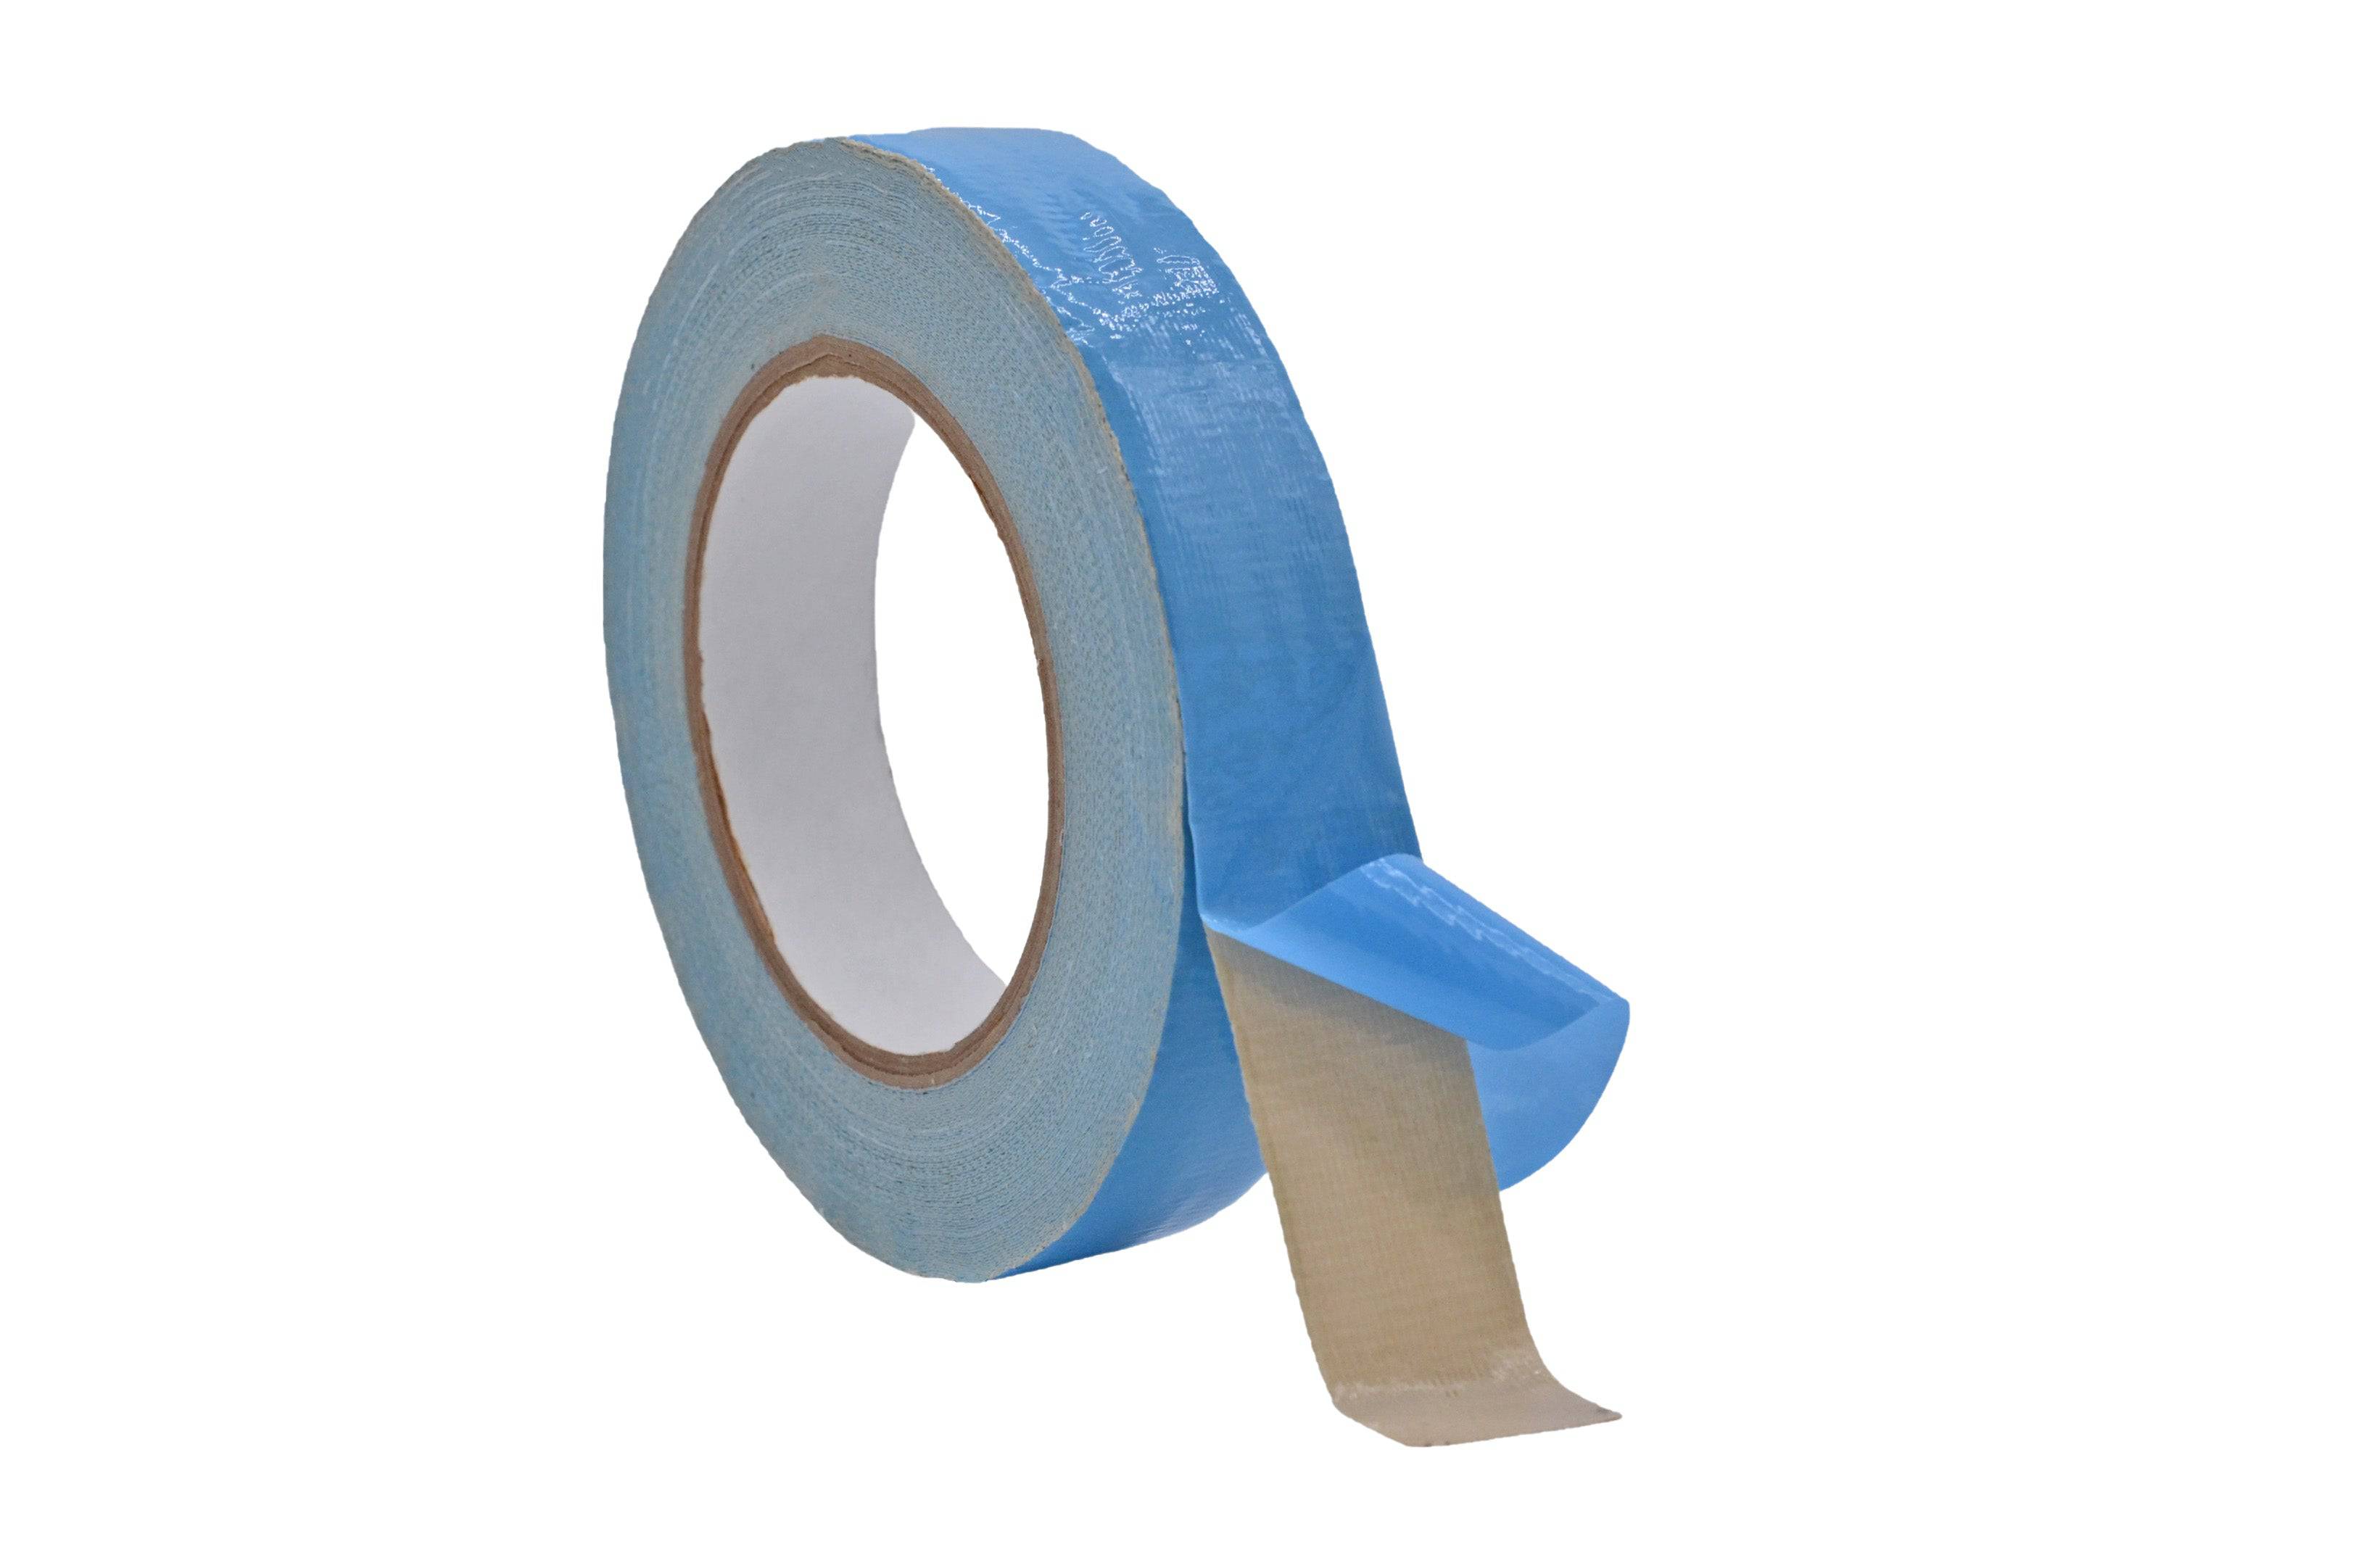 DC-5215 - Double Sided Polyester Fabric Tape (6.1 Mil) - Cloth